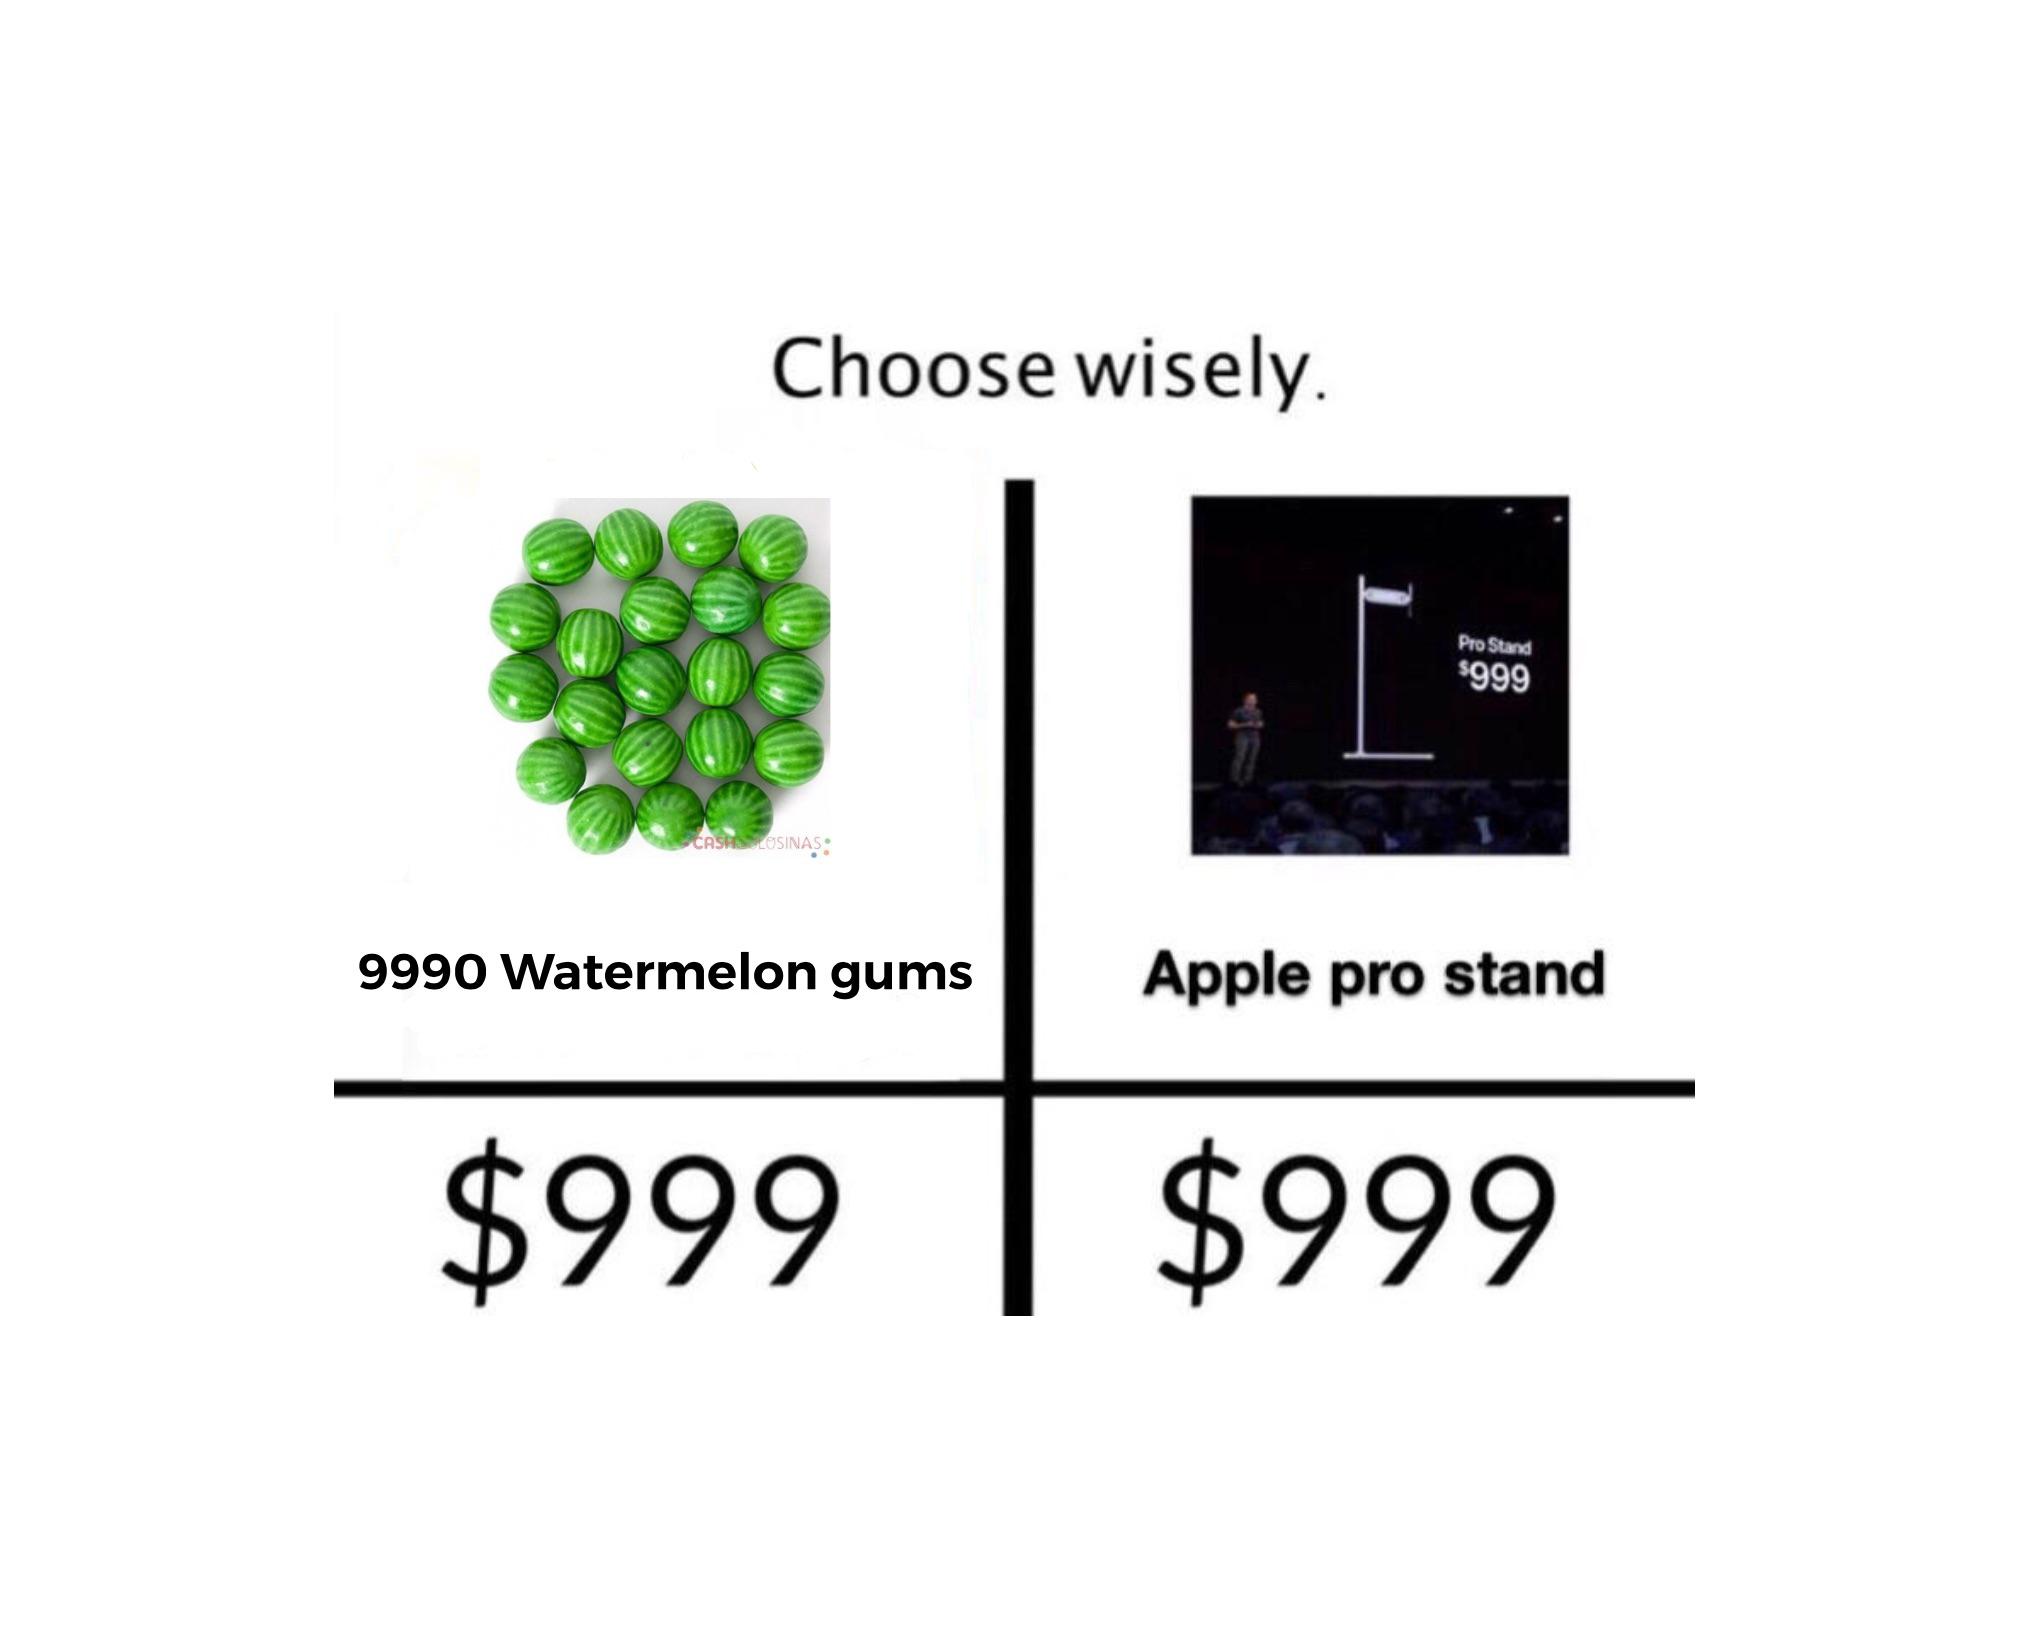 apple pro stand memes - communication - Choose wisely. Pro Stand $999 Caselosinas 9990 Watermelon gums pro stand $999 $999